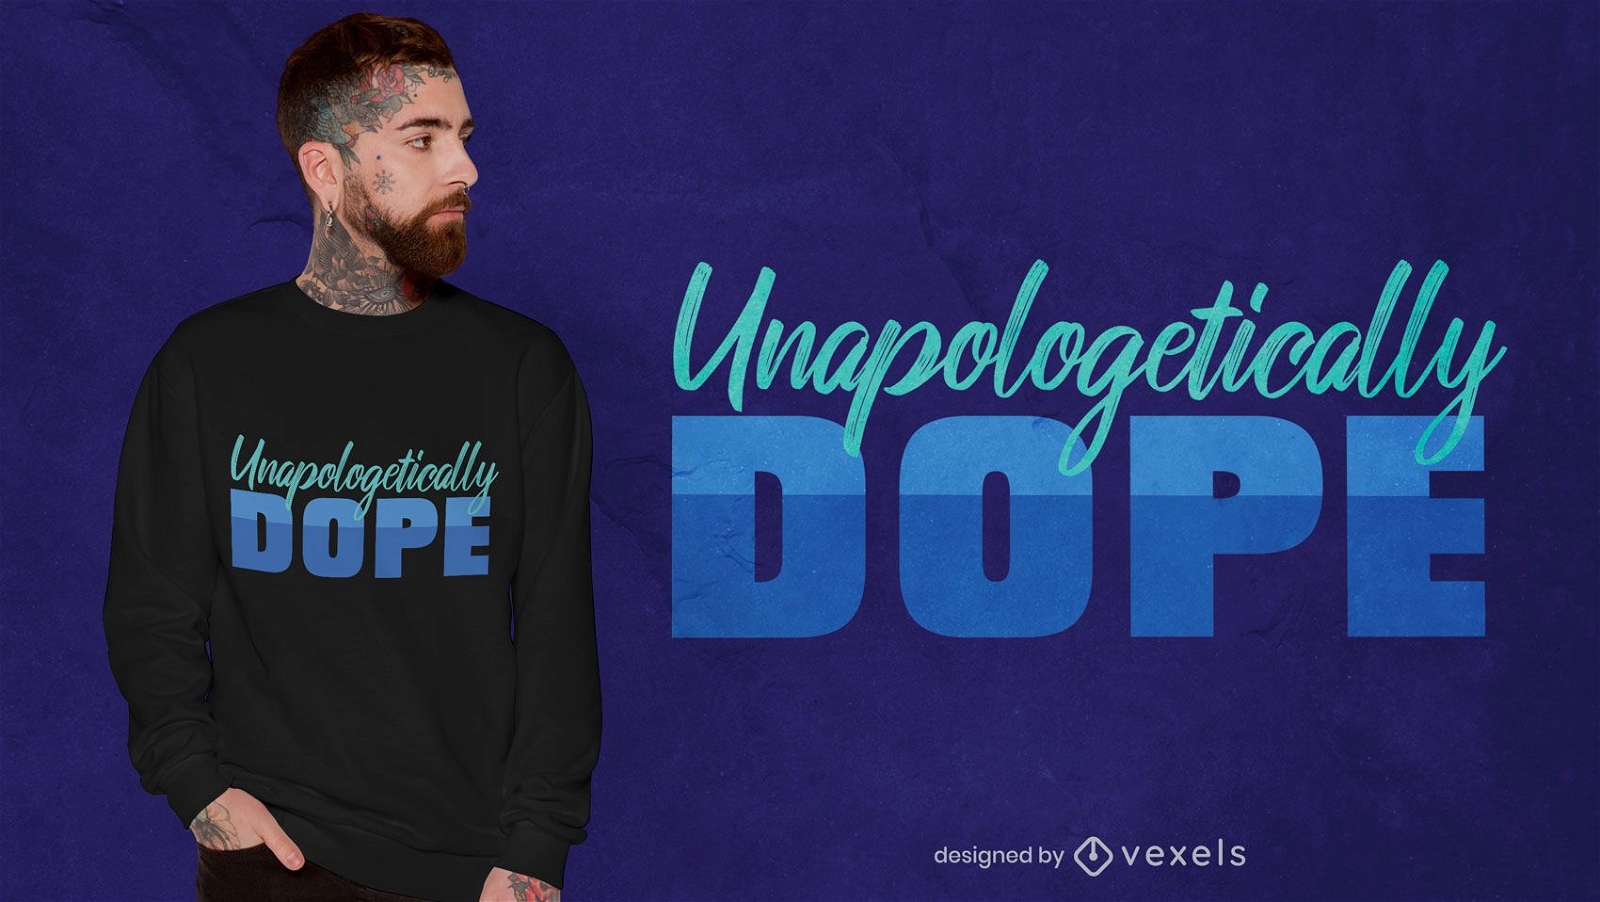 Unapologetically dope quote t-shirt design